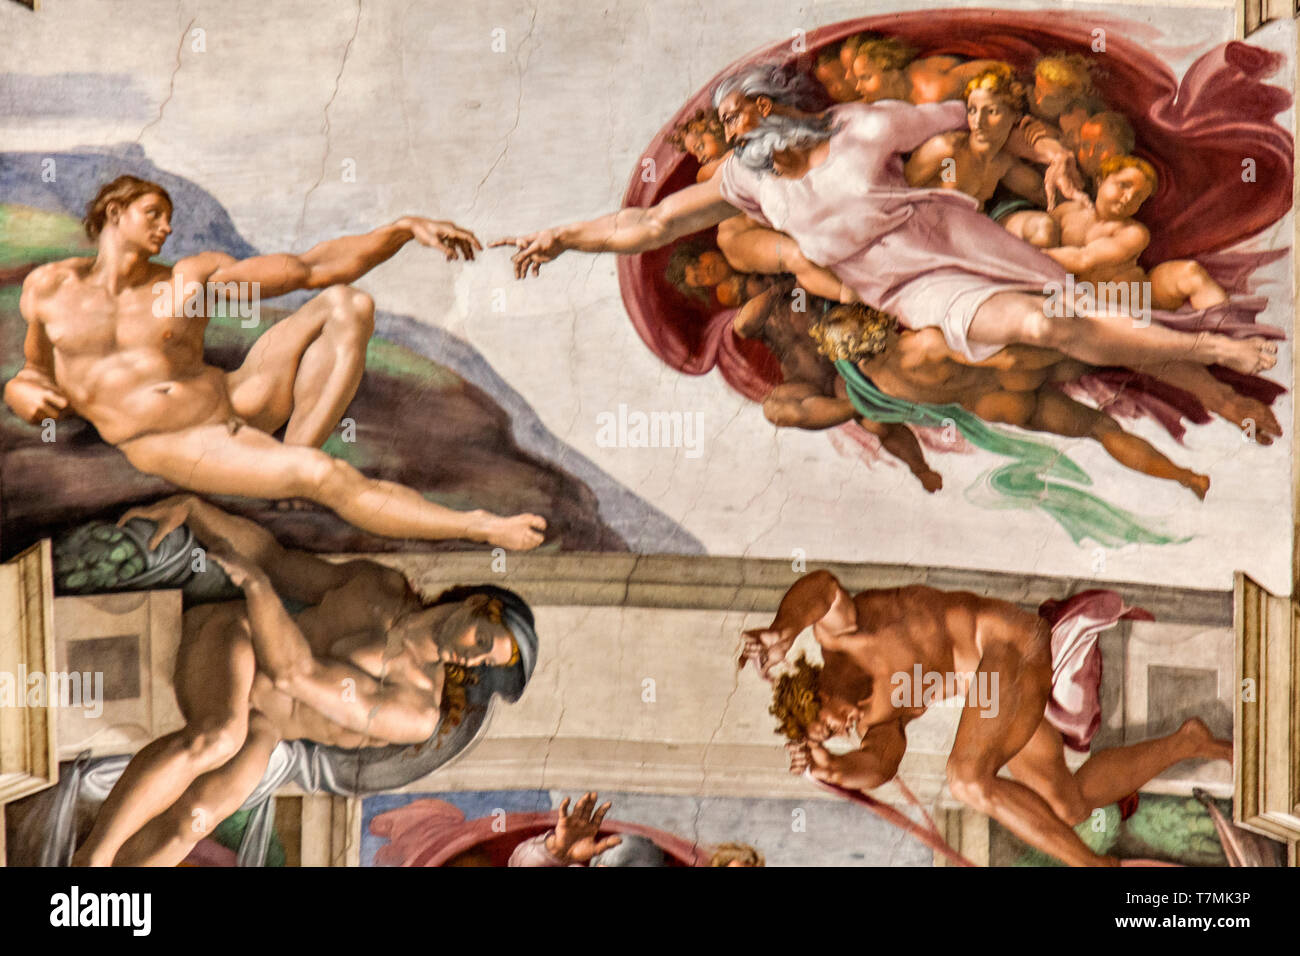 The Creation of Adam by Michelangelo in the Sistine Chapel ceiling murals, Vatican City, Rome,Italy Stock Photo